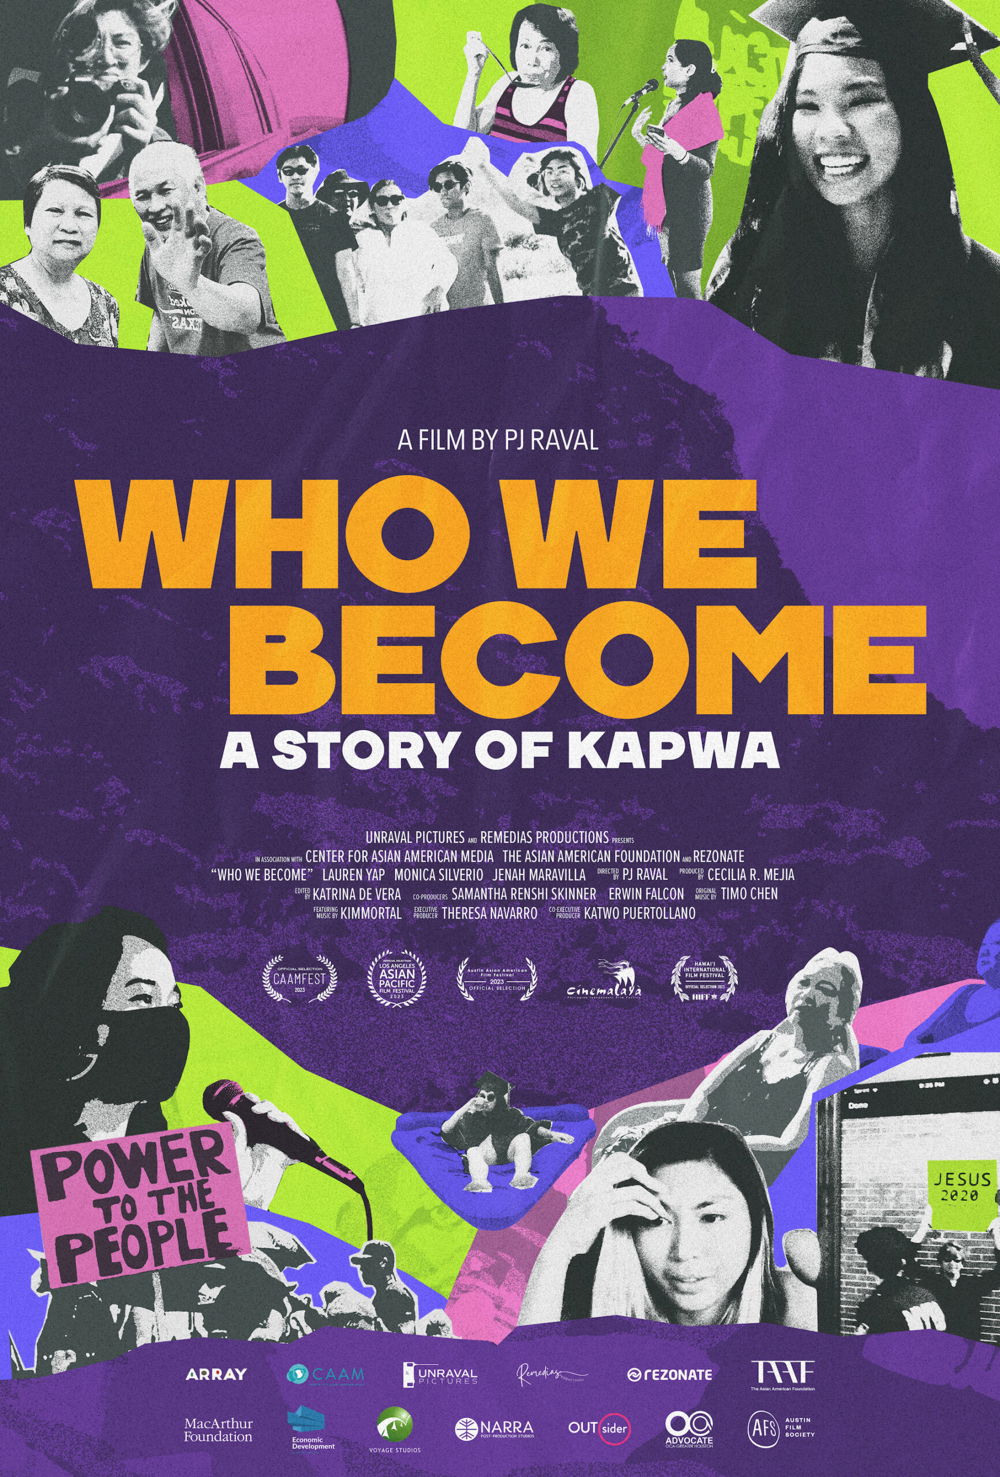 A colorful promotional poster with a purple background and cropped photographs of young Asian American women and their families framing the title of the film, which is centered on the poster in bright orange and white lettering. It reads, "WHO WE BECOME: A STORY OF KAPWA.